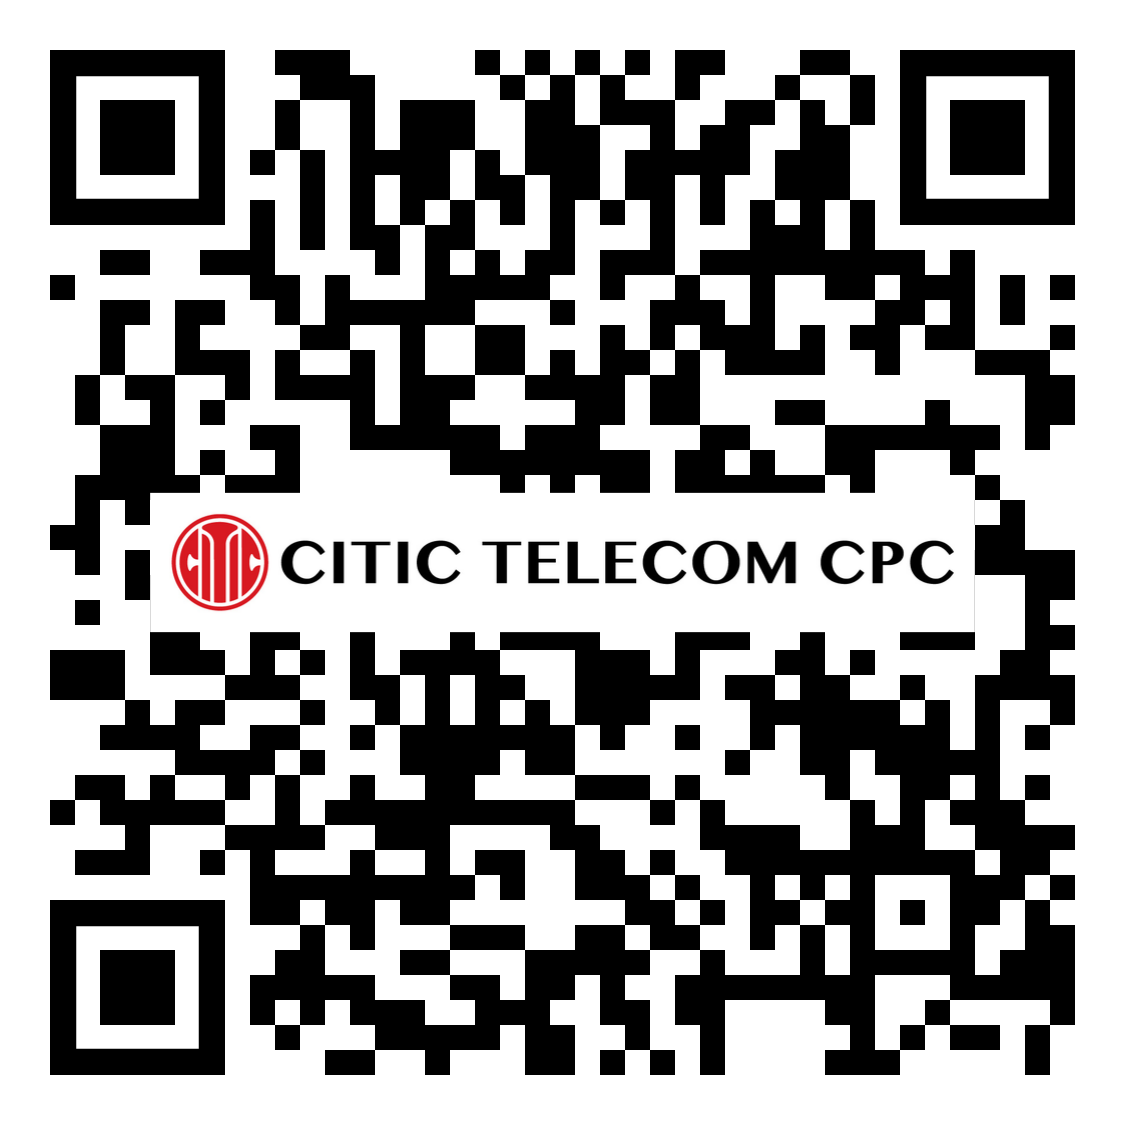 CITIC Telecom CPC Helps Enterprises to Maintain Business Continuity with its Cloud Desktop and Remote Access Connectivity Solutions